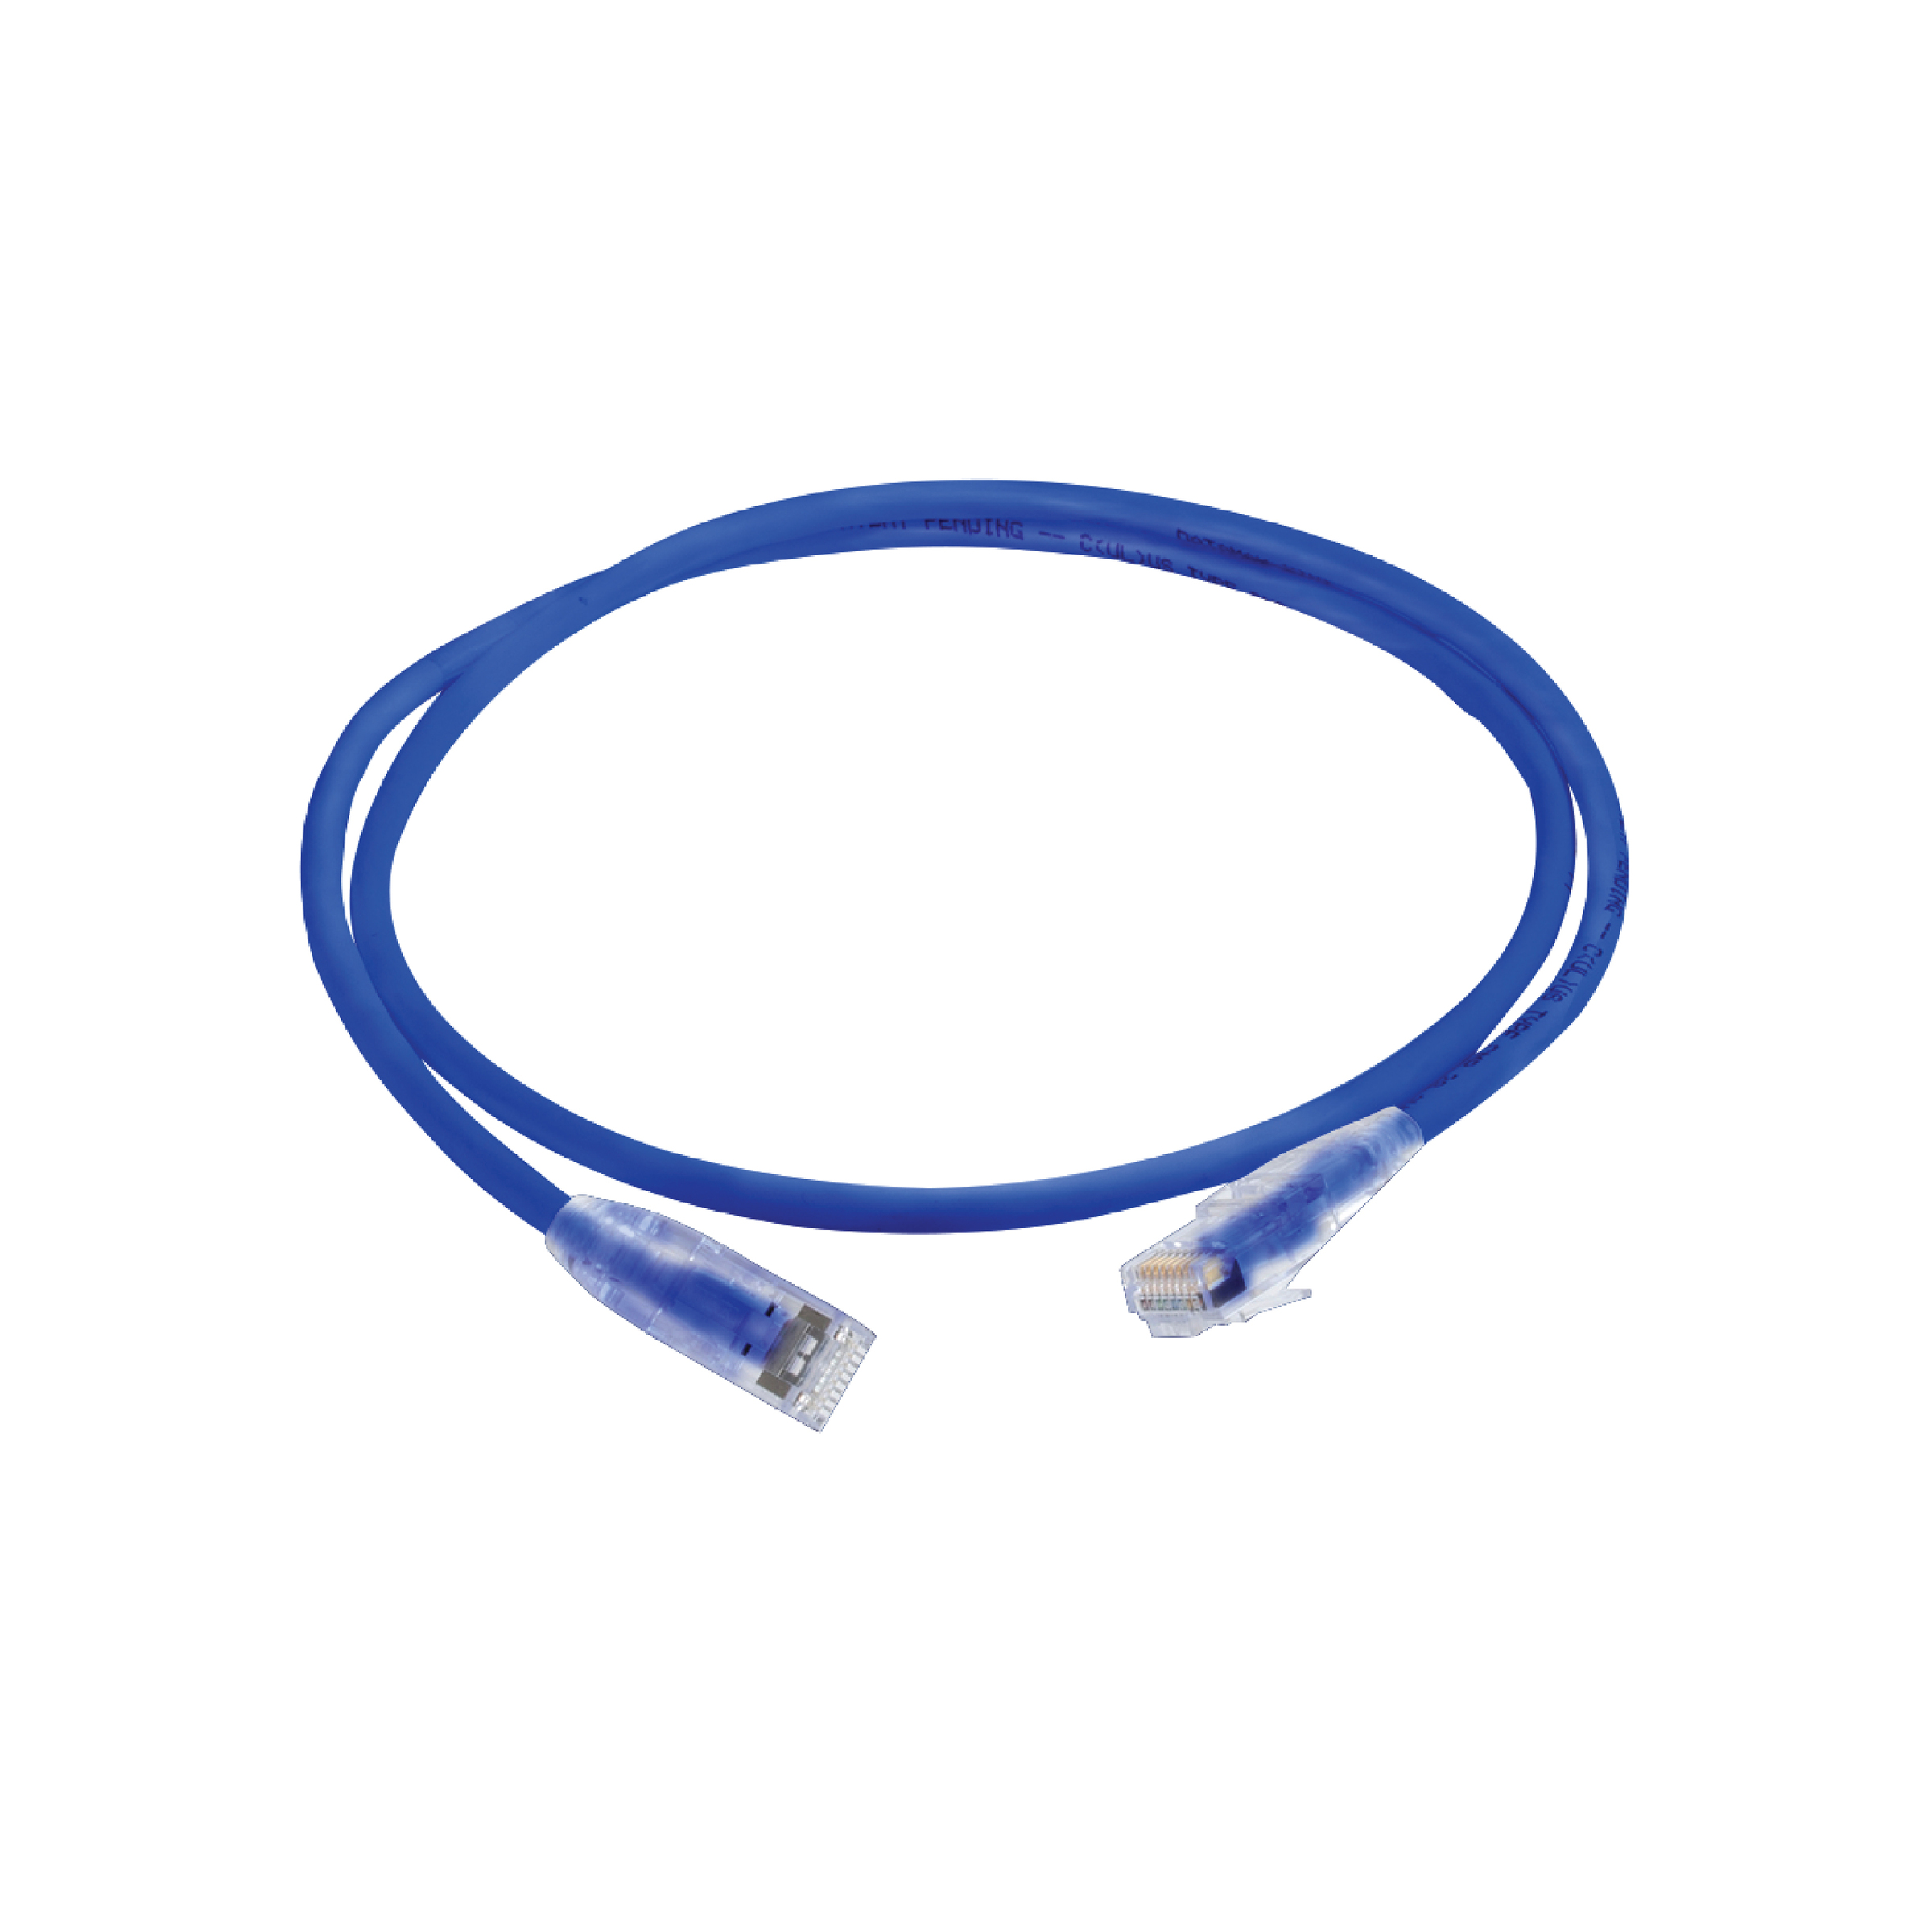 Structured Cabling Solution_Cable Boots_Patchcord Cable_Blue.jpg